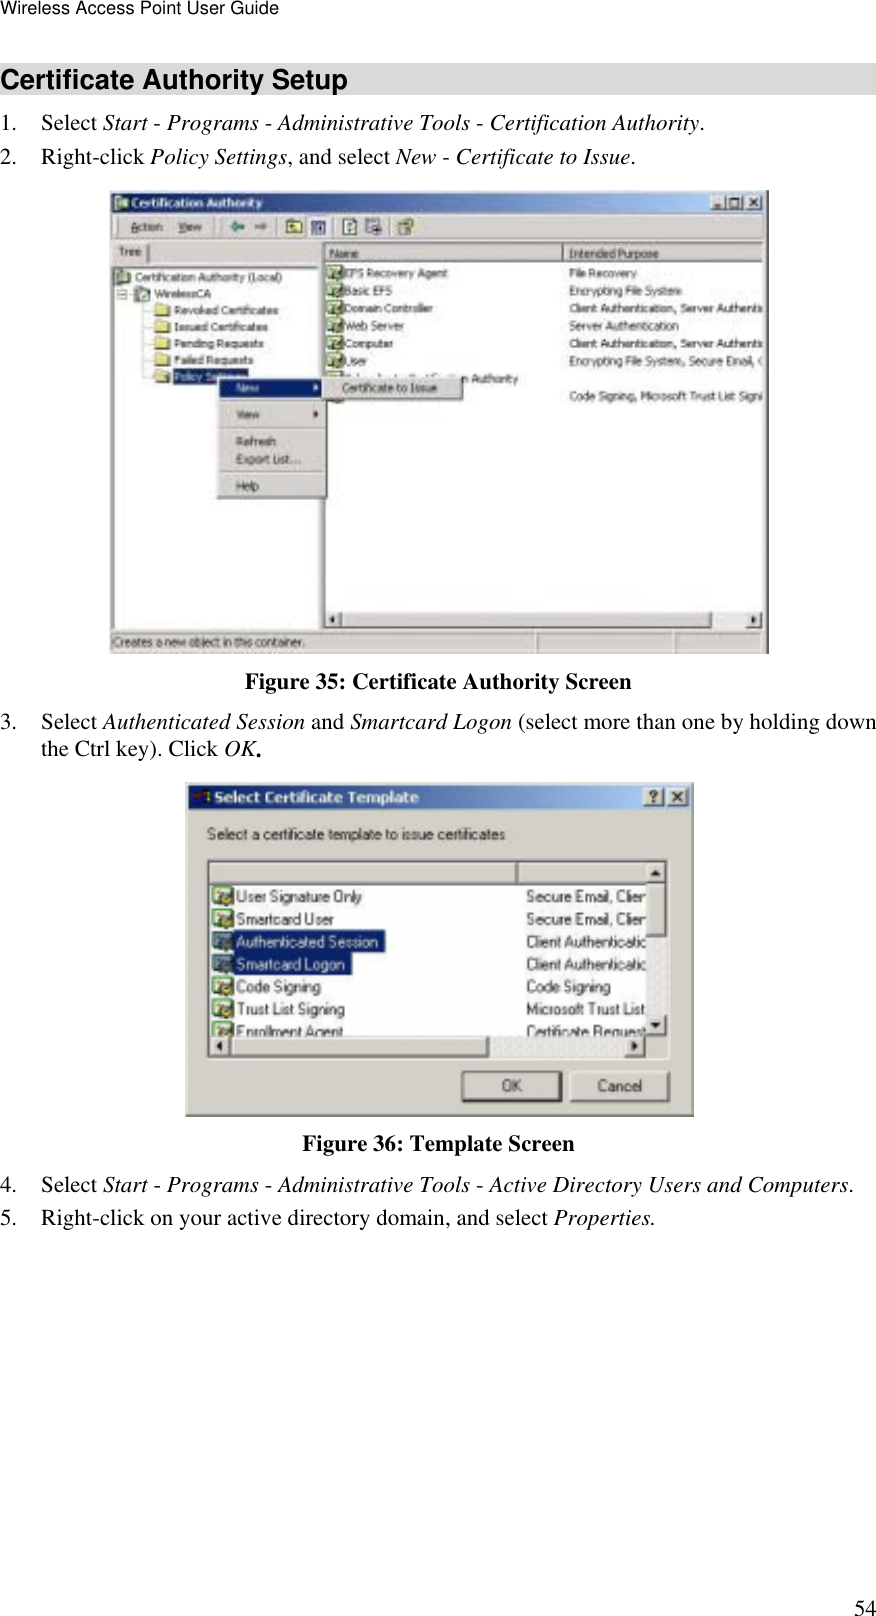 Wireless Access Point User Guide 54 Certificate Authority Setup 1. Select Start - Programs - Administrative Tools - Certification Authority.  2. Right-click Policy Settings, and select New - Certificate to Issue.   Figure 35: Certificate Authority Screen 3. Select Authenticated Session and Smartcard Logon (select more than one by holding down the Ctrl key). Click OK.  Figure 36: Template Screen 4. Select Start - Programs - Administrative Tools - Active Directory Users and Computers. 5.  Right-click on your active directory domain, and select Properties.  